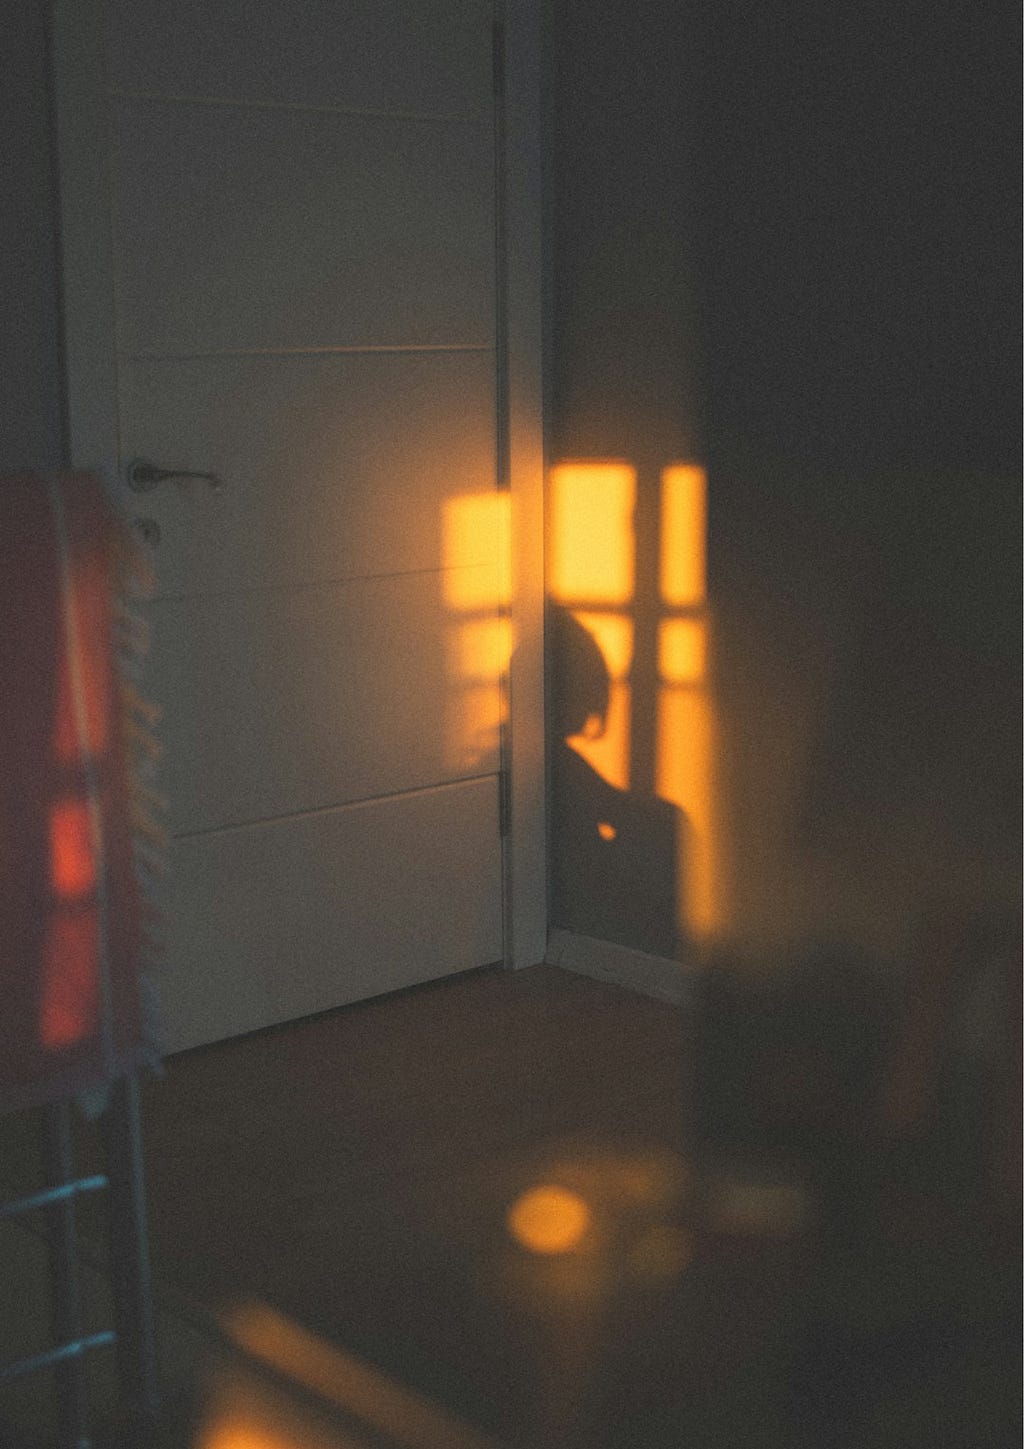 The corner of a room, including the closed door, with the shadow of someone sitting with their head hanging, presumably in shame.